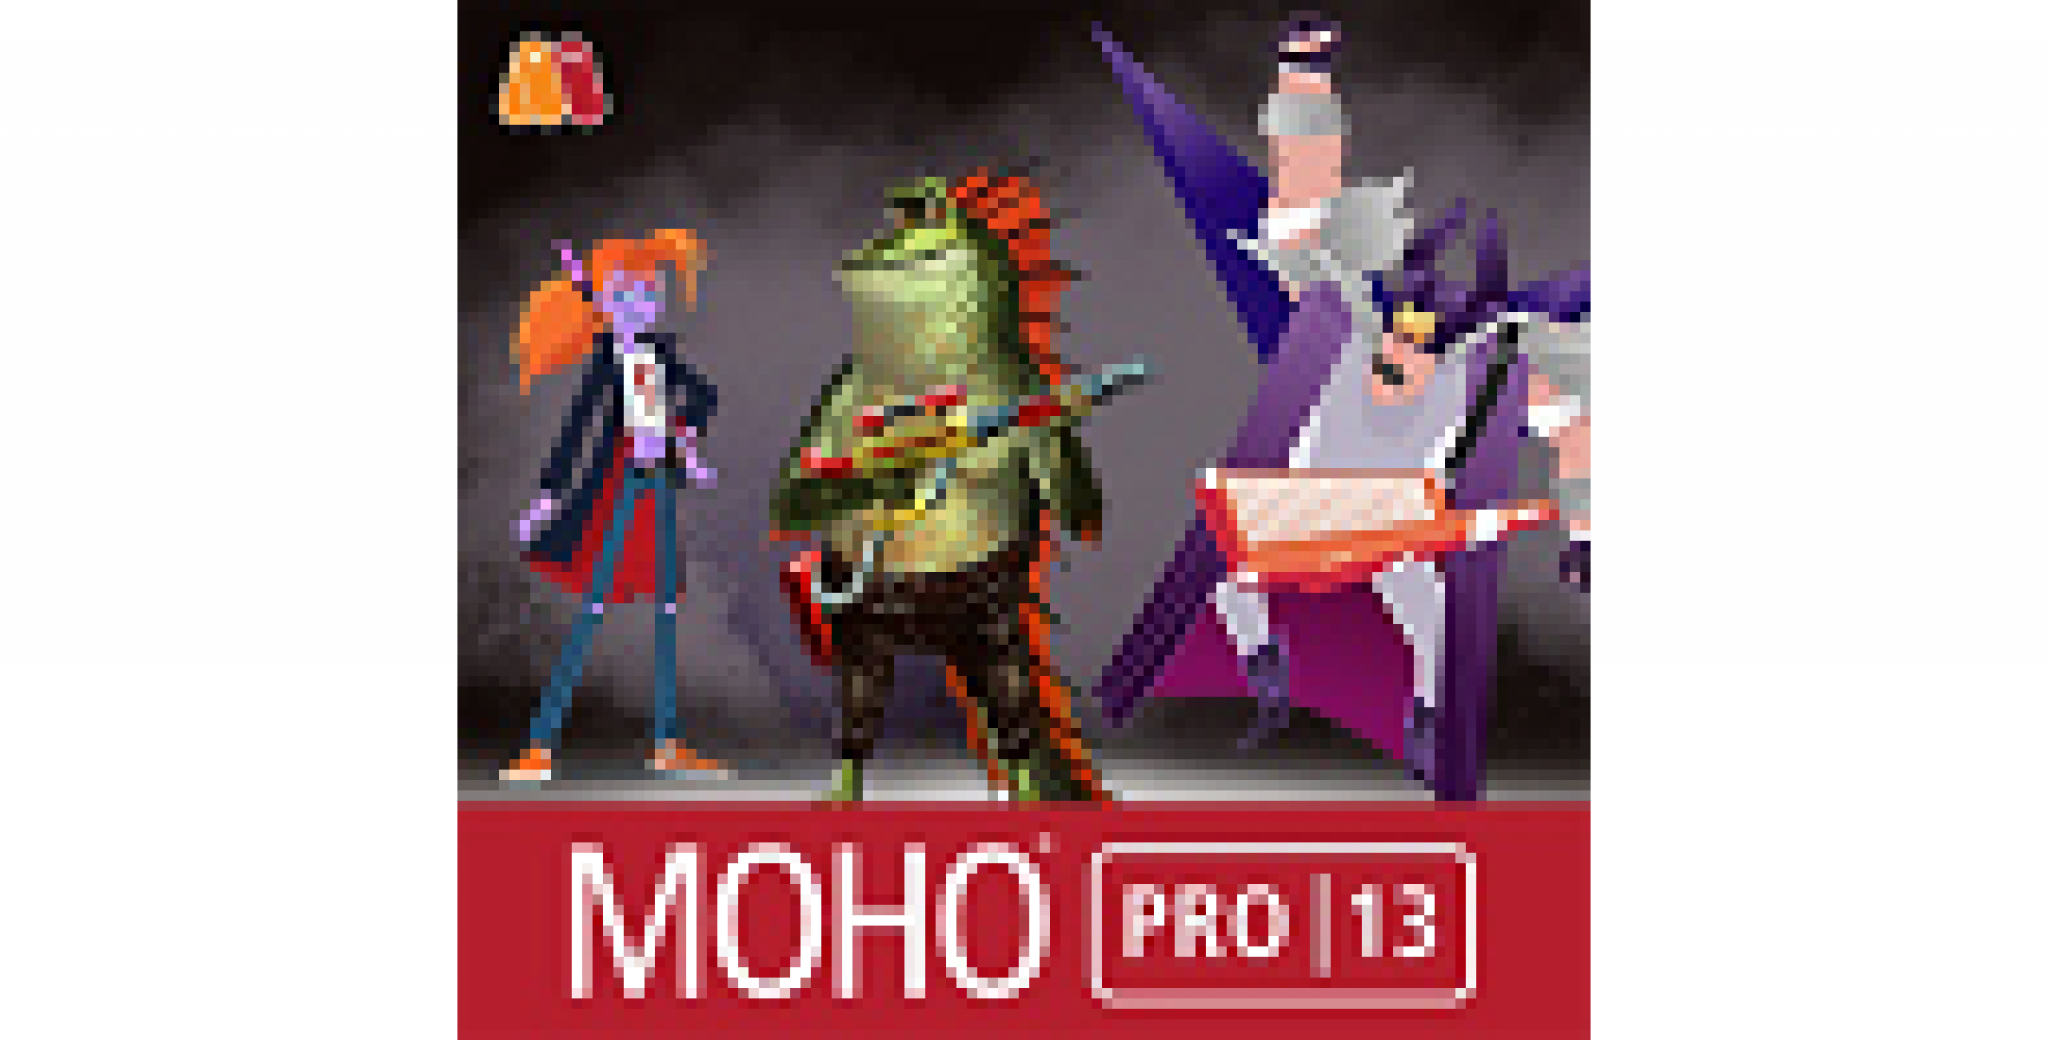 moho pro 13 system requirements